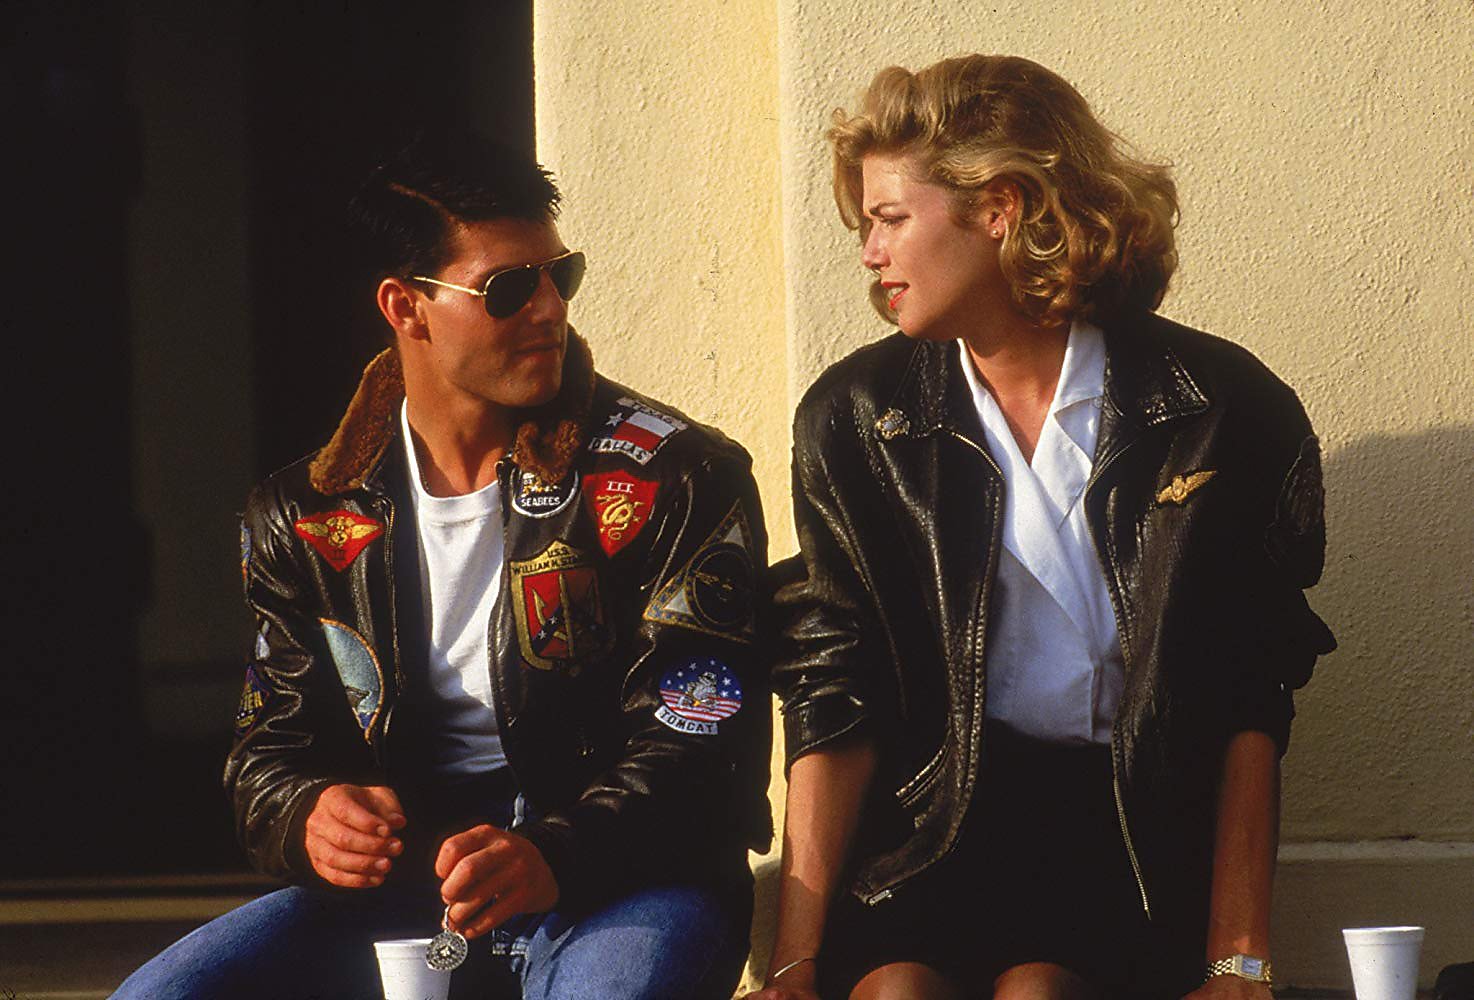 Tony Scott is the underrated king of '80s and '90s blockbuster movies